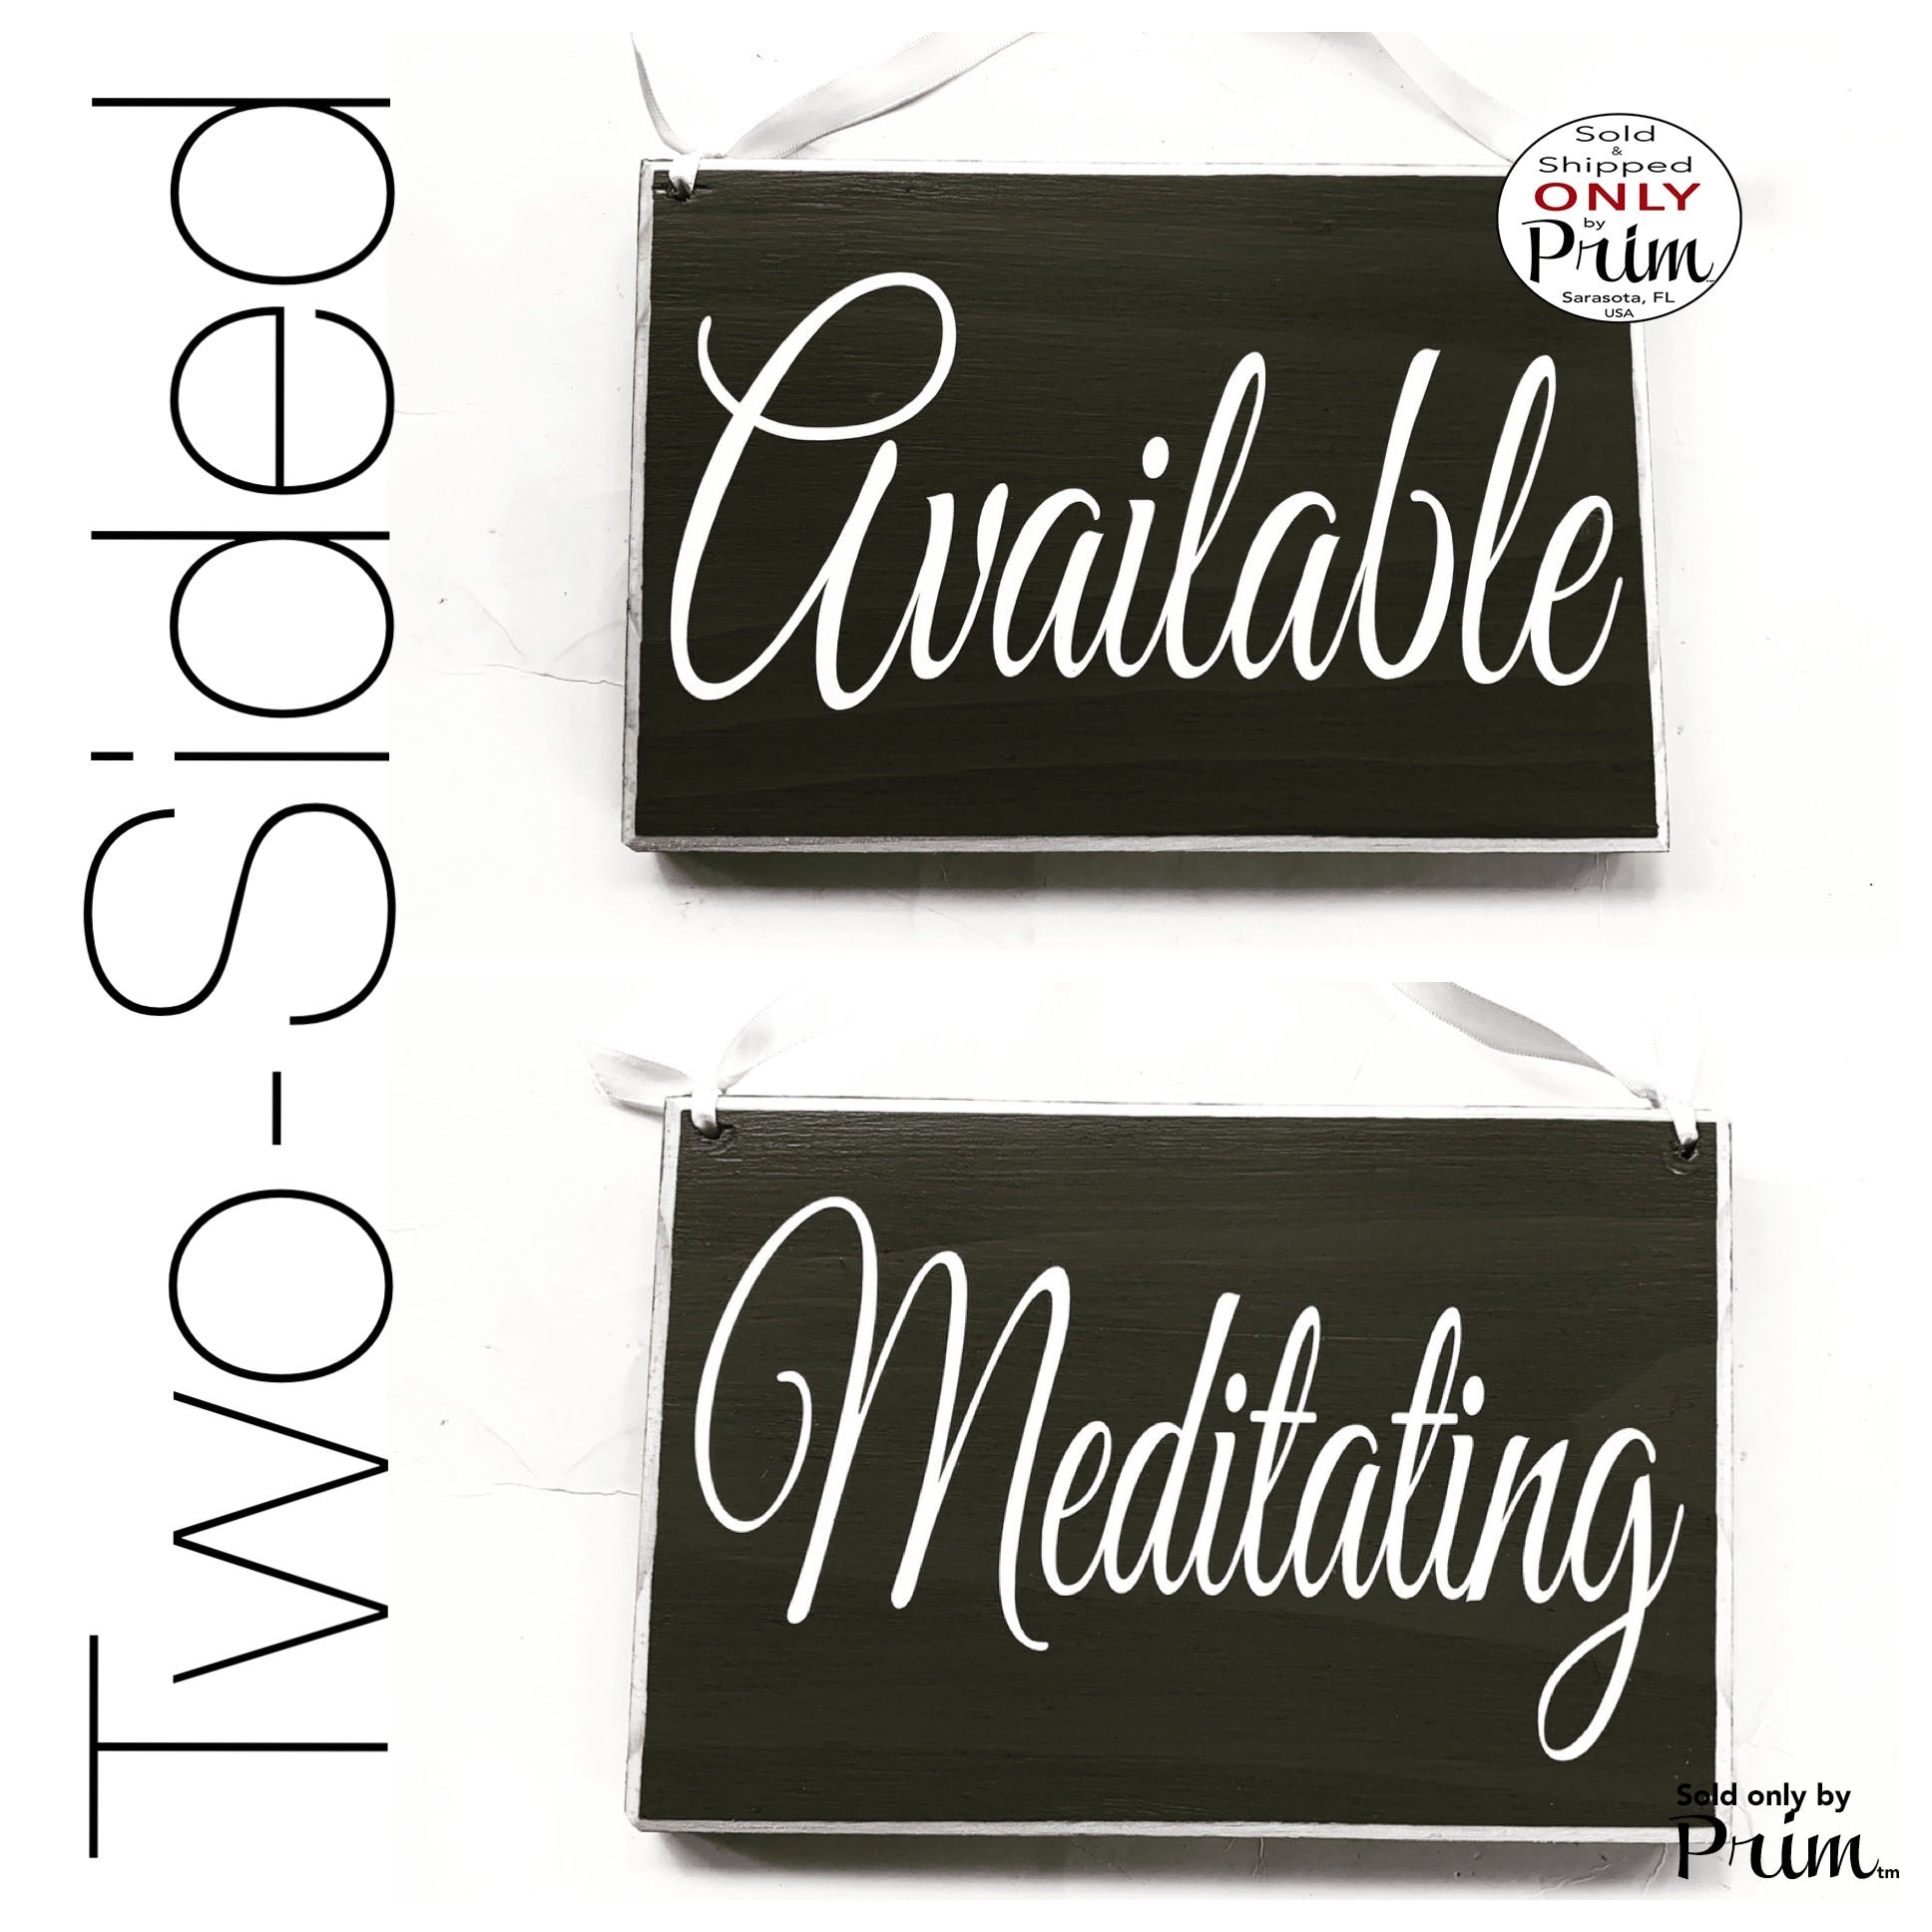 8x6 Available Meditating Custom Wood Sign Quiet Please In Session Do Not Disturb Namaste Relax Yoga Office Spa Salon Studio Wall Plaque